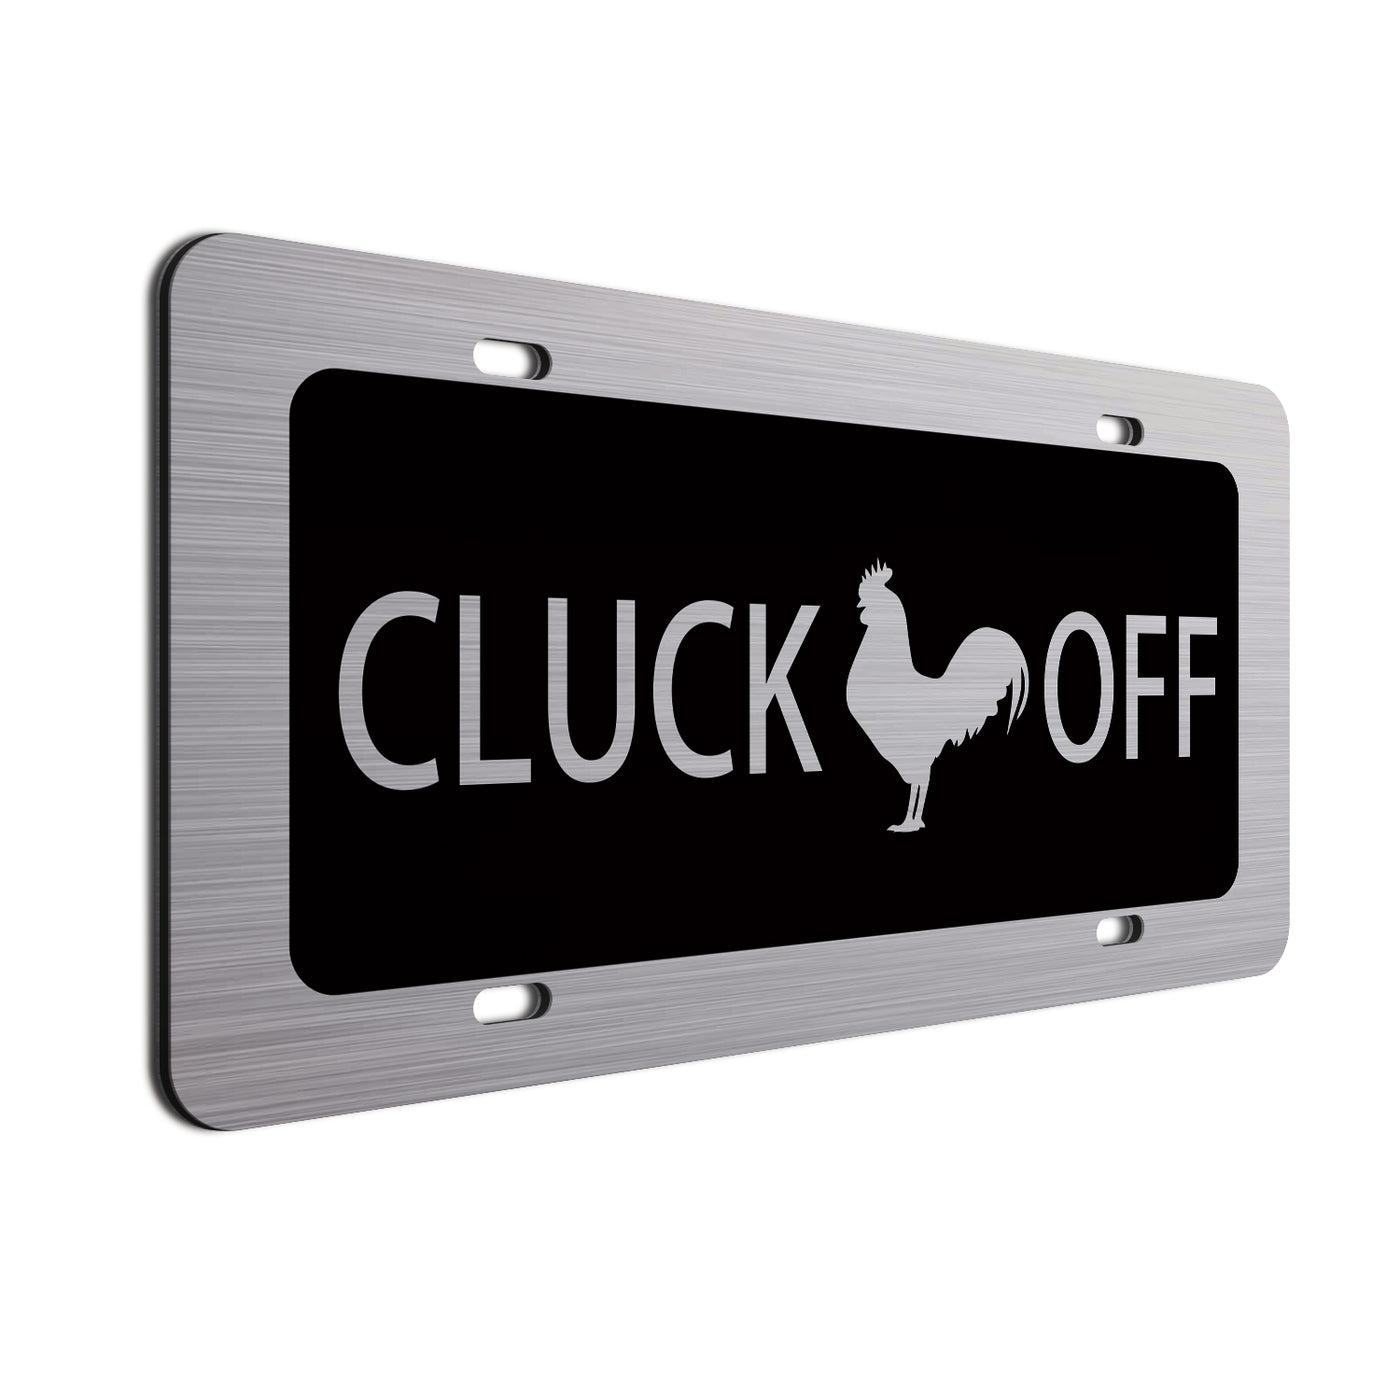  Cluck Off Car License Plate for farmers Black